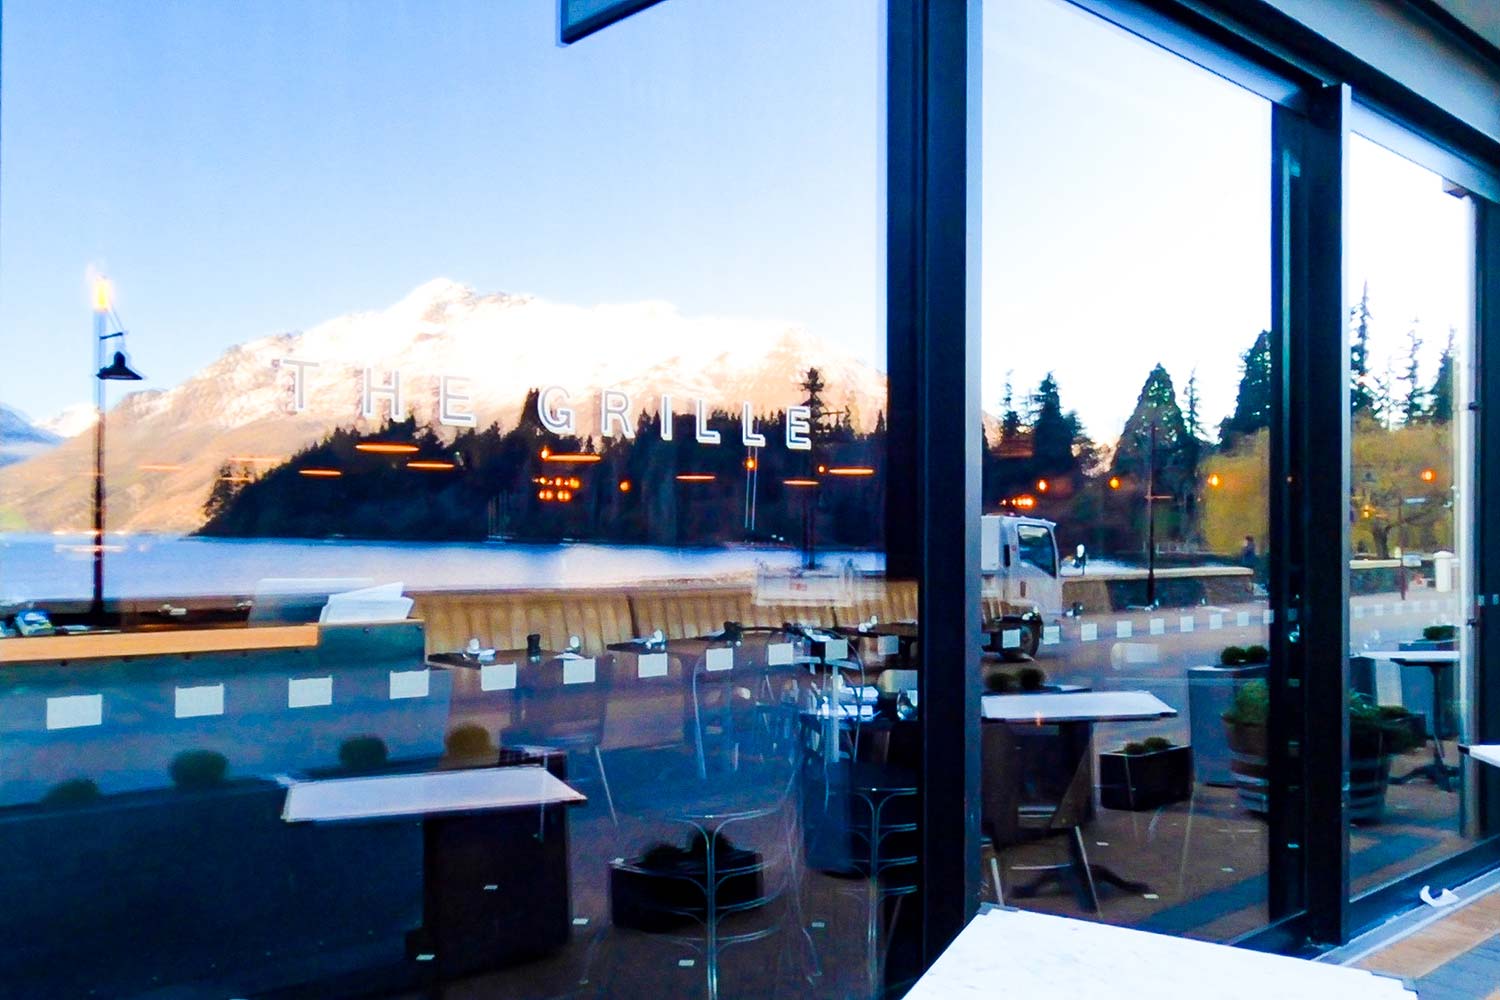 A reflection of snow capped mountains in a restaurant front glass window